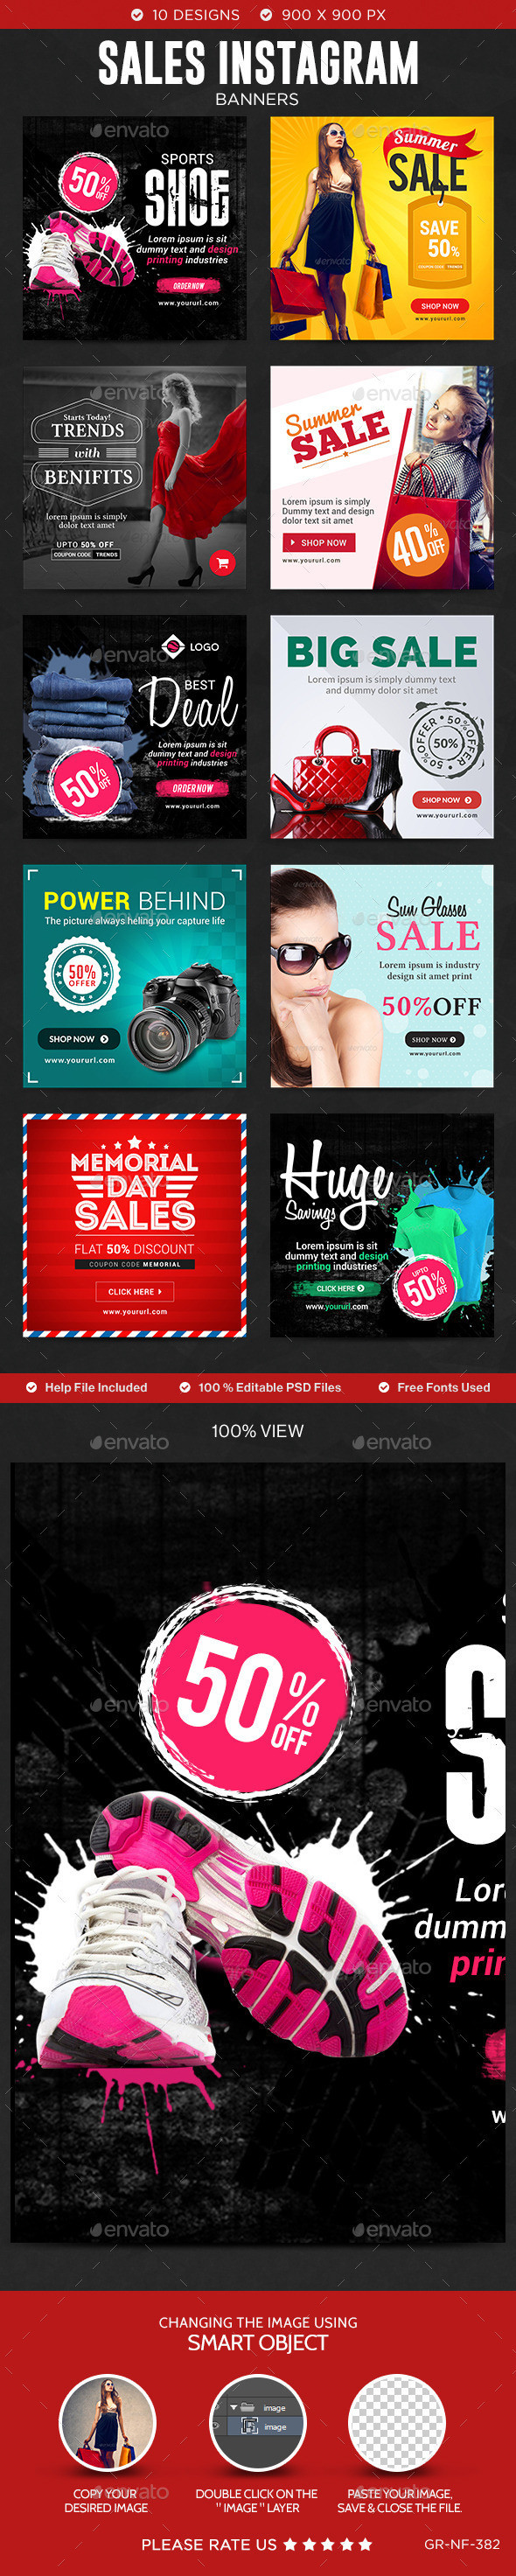 Nf 382 sales 20instagram 20templates preview